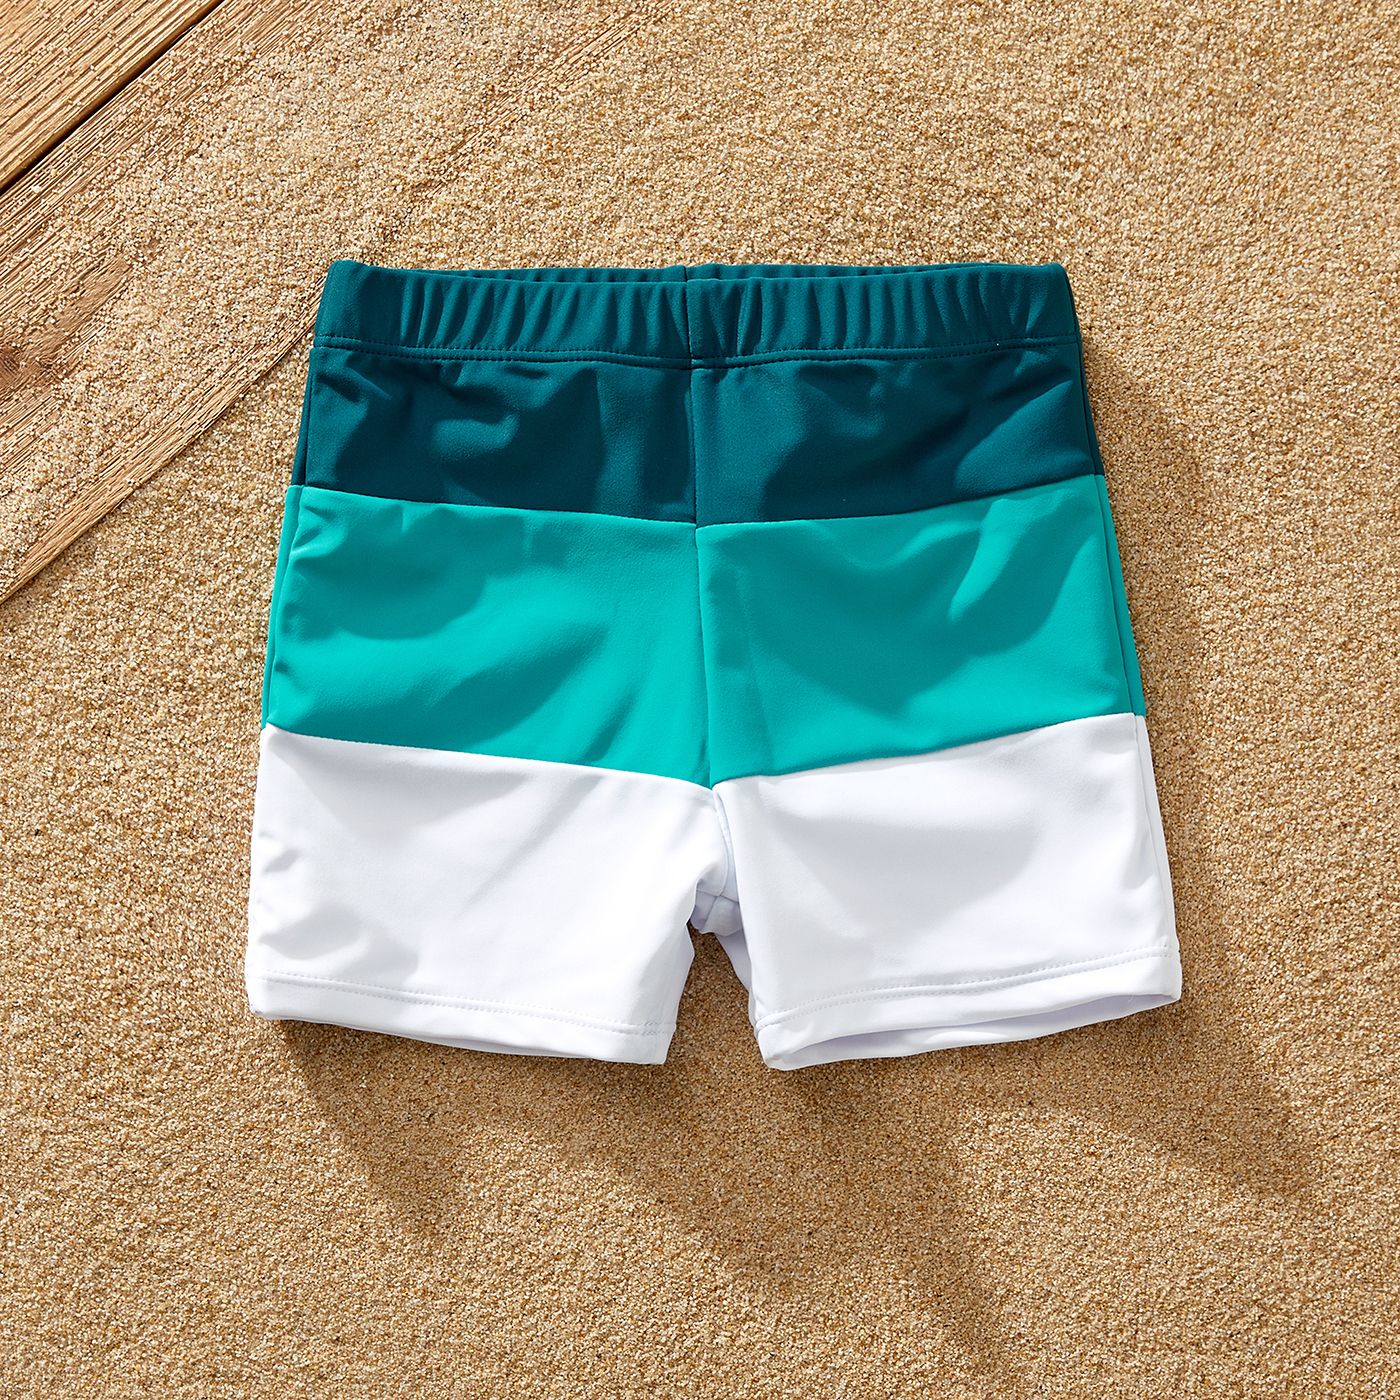 Family Matching Color Block Criss Cross Front One-piece Swimsuit or Swim Trunks Shorts